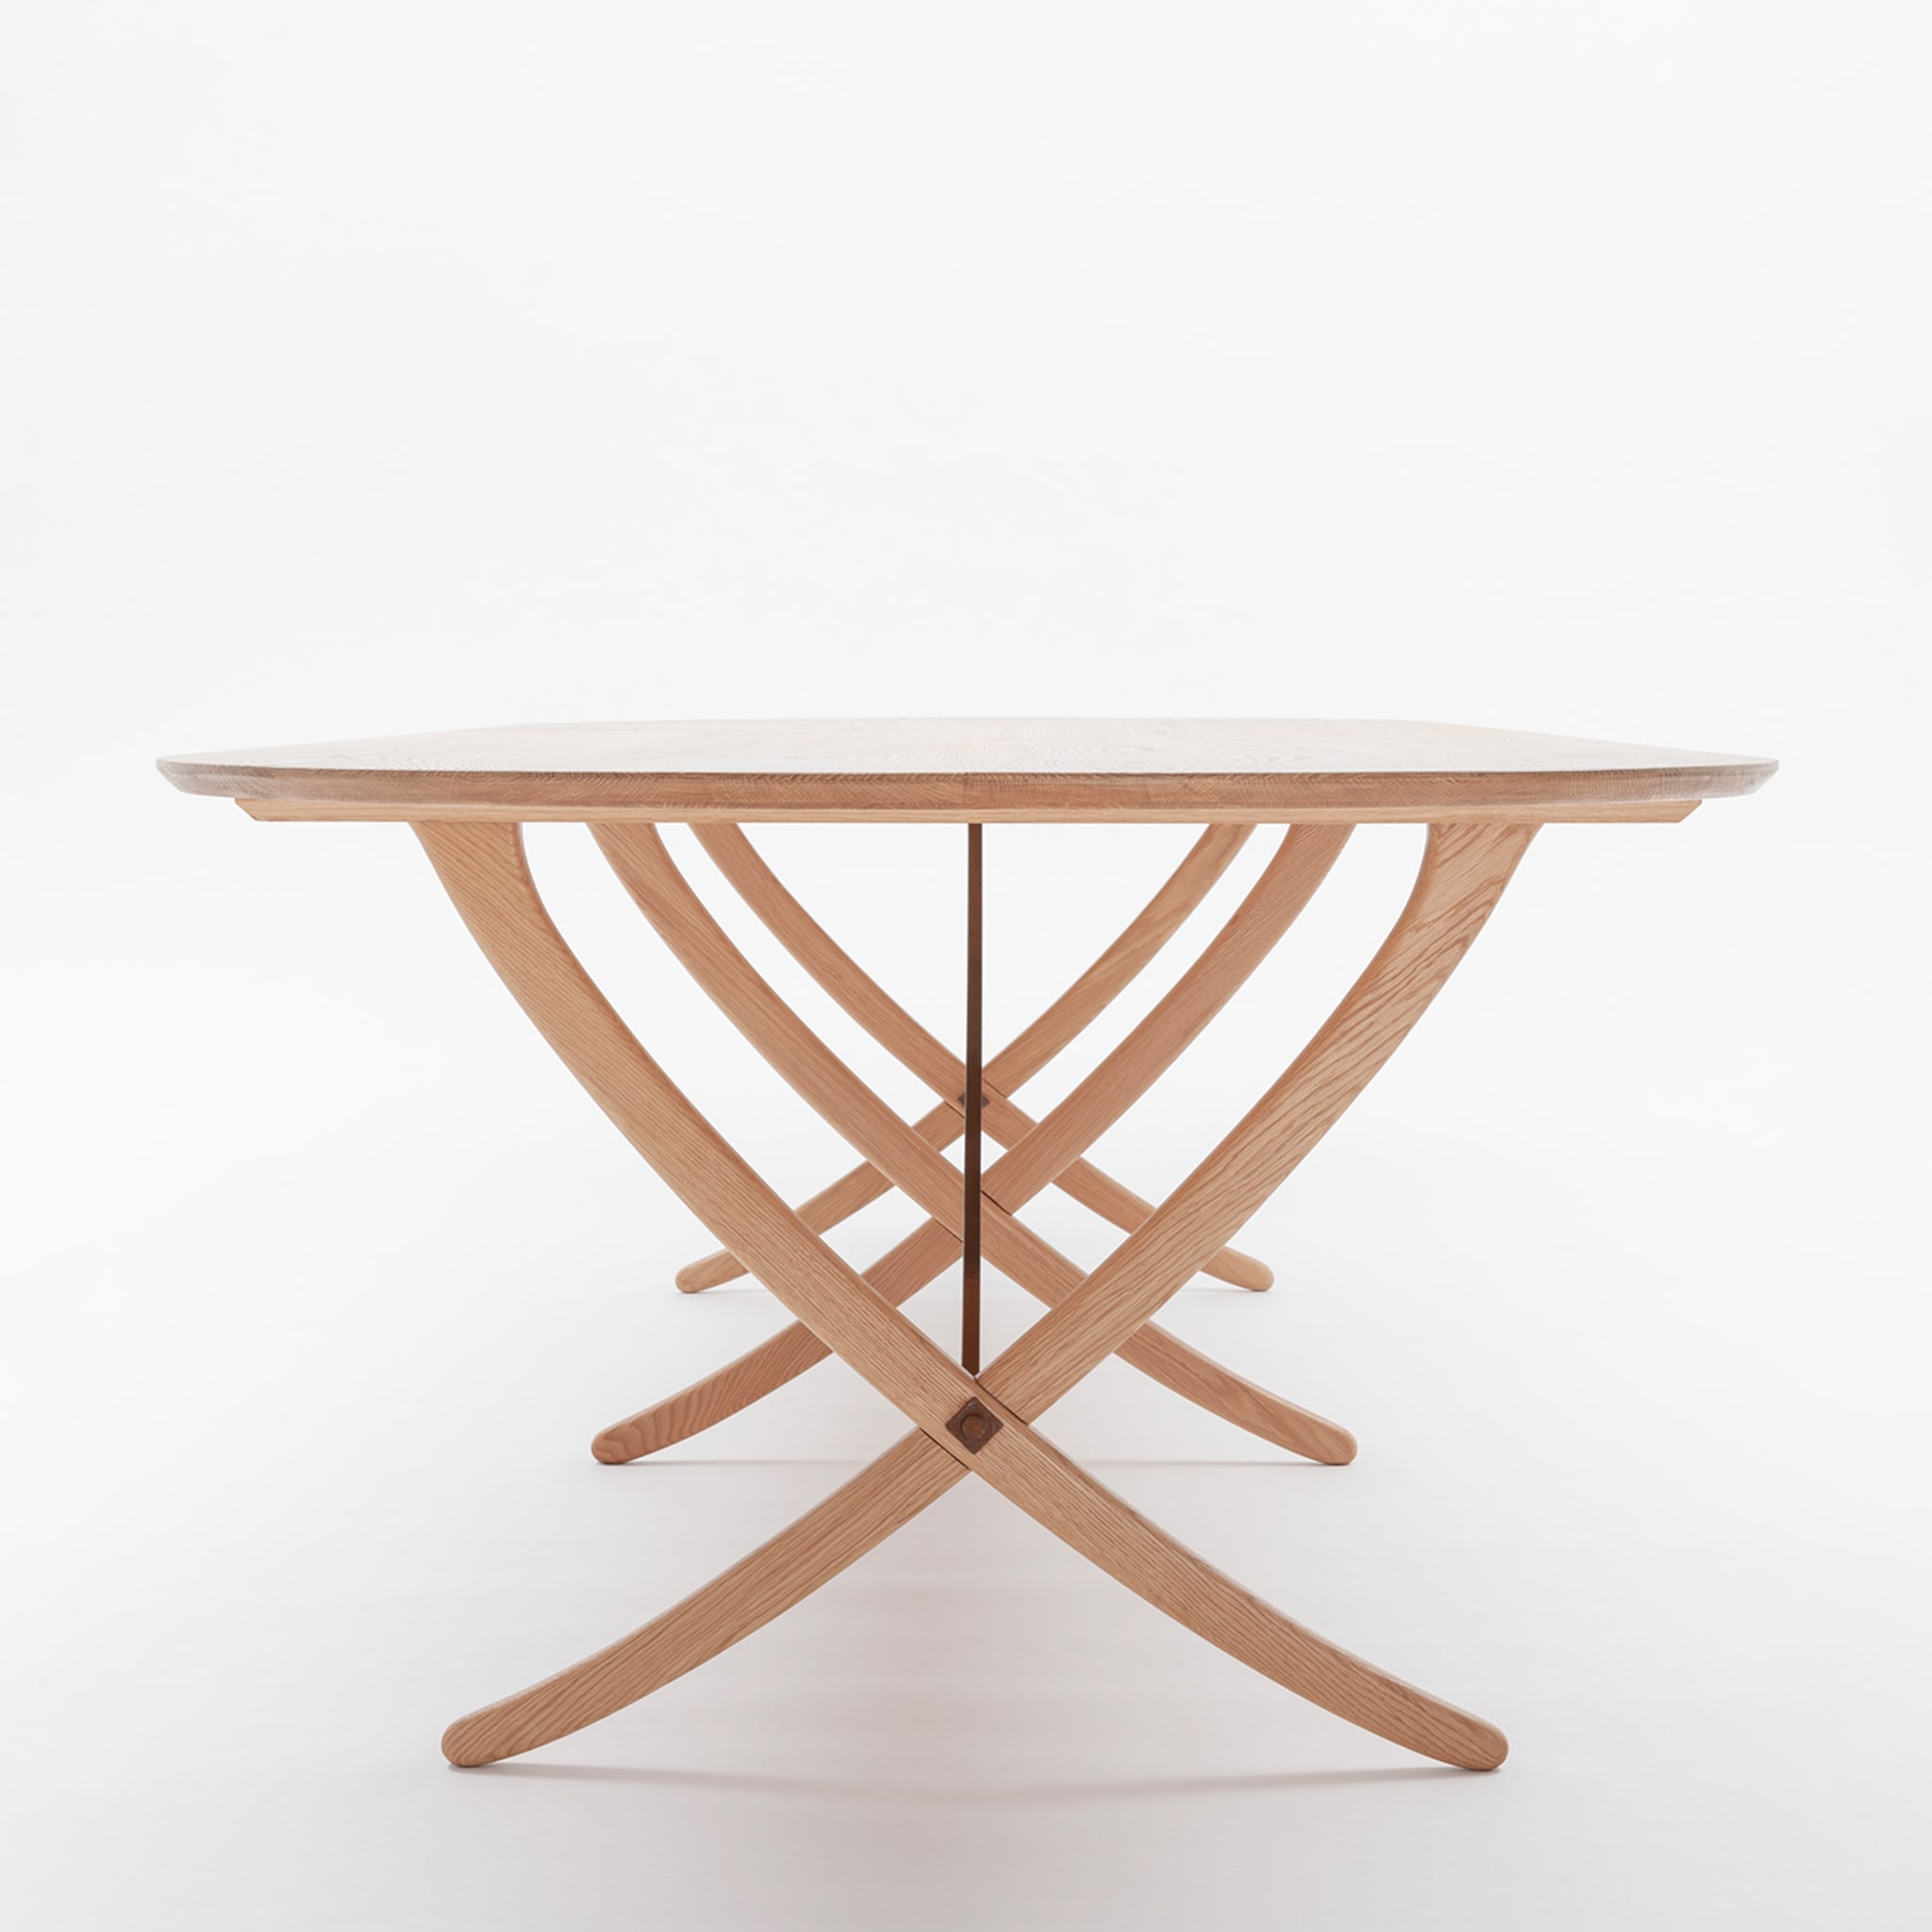 Arch Large Durmast Dining Table - Alternative view 3